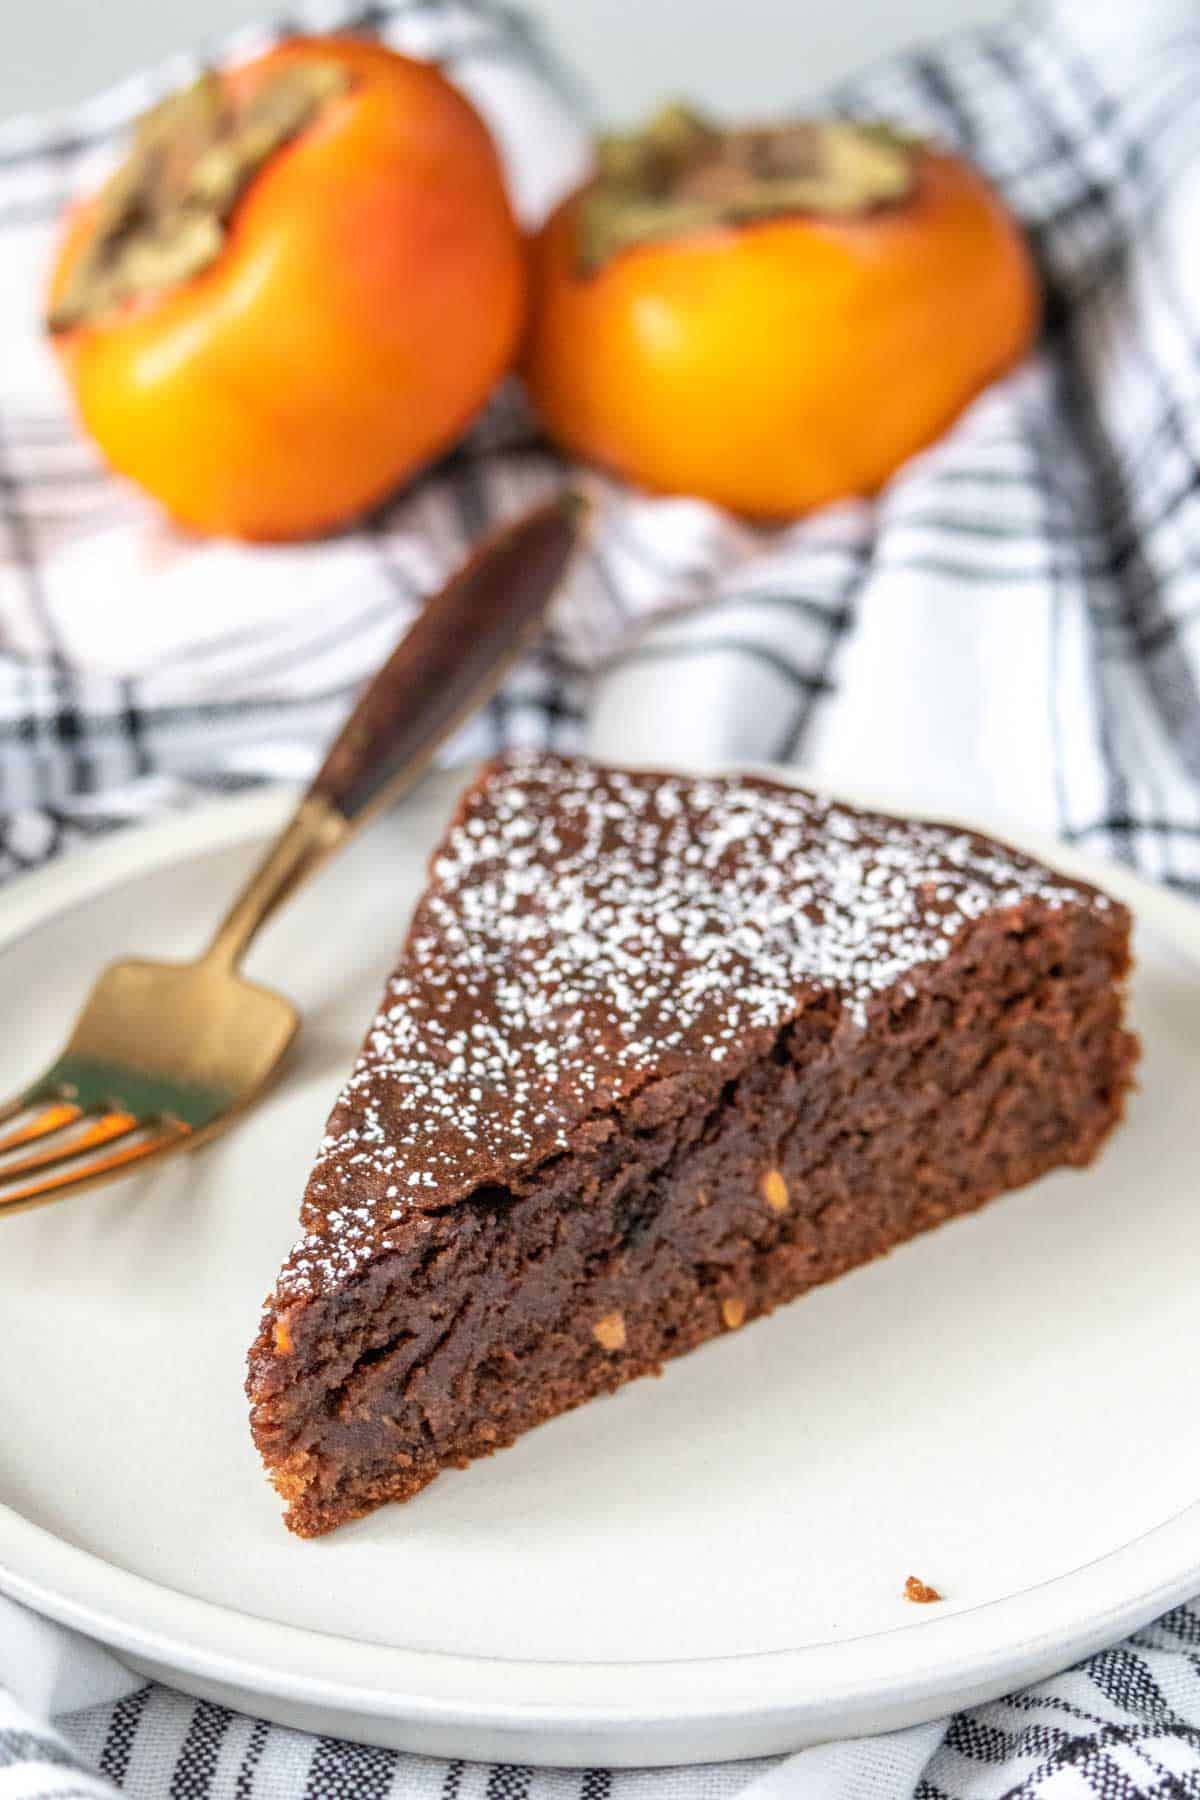 Slice of chocolate persimmon cake on a plate with a fork and persimmons behind.